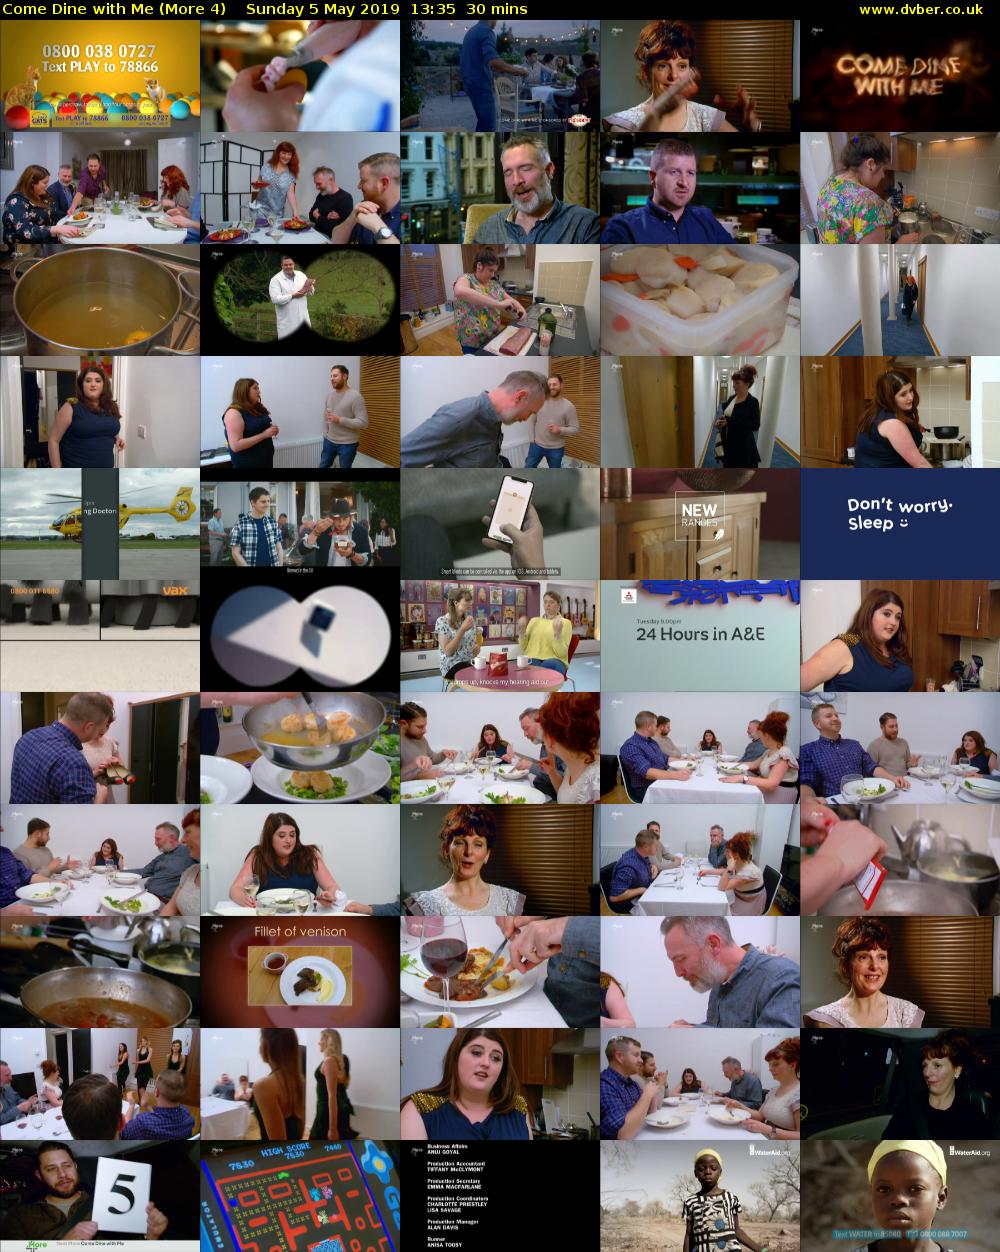 Come Dine with Me (More 4) Sunday 5 May 2019 13:35 - 14:05